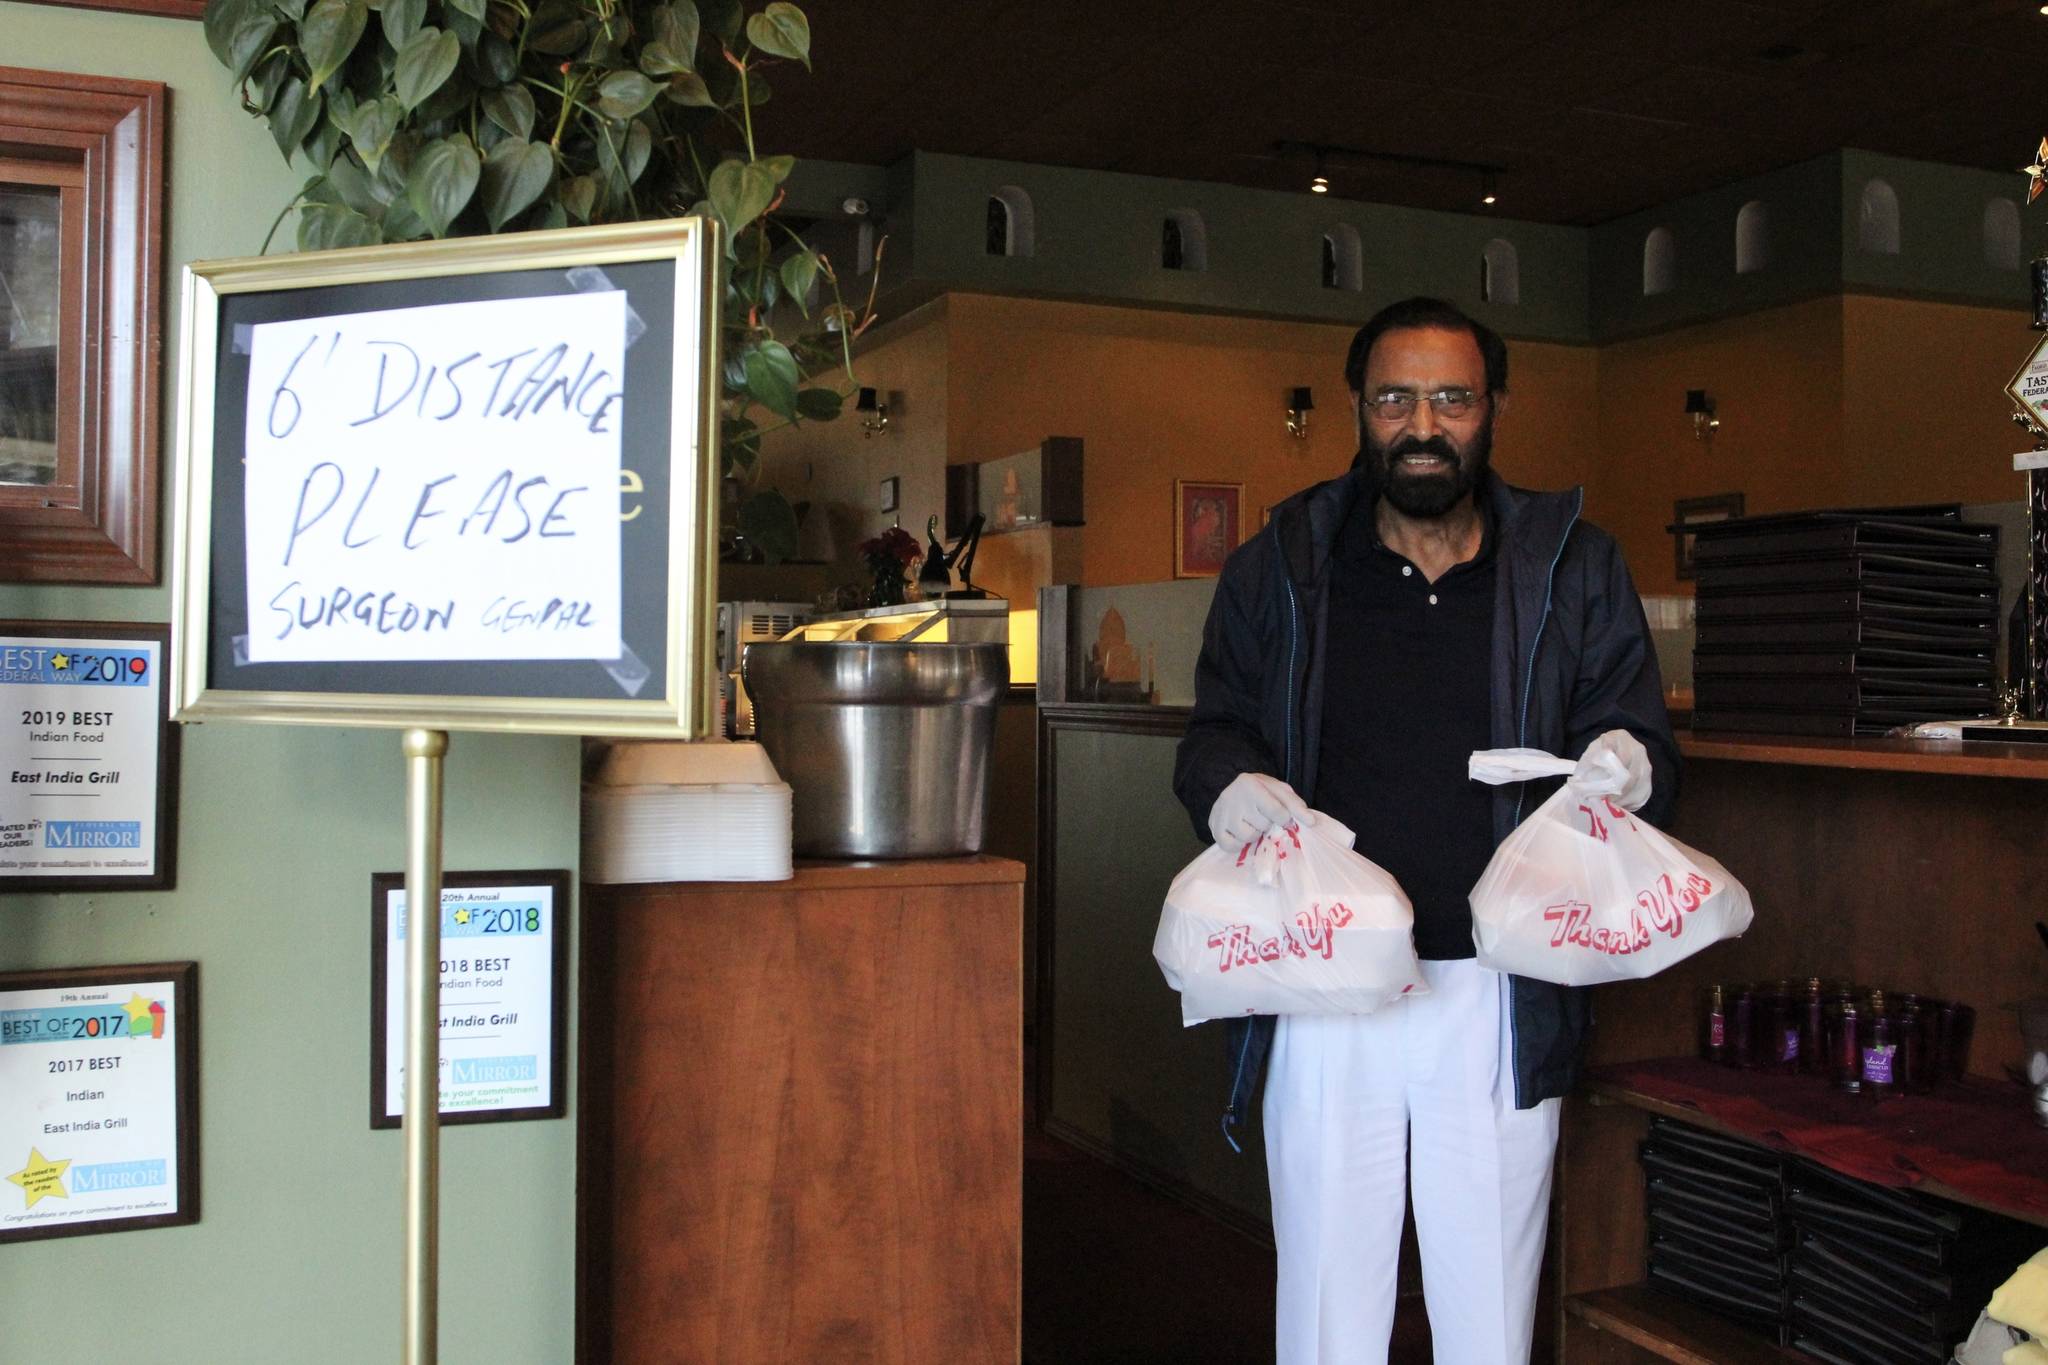 Kabal Gill, owner of East India Grill in Federal Way, wears gloves to hand over take-out orders at his restaurant. File photo